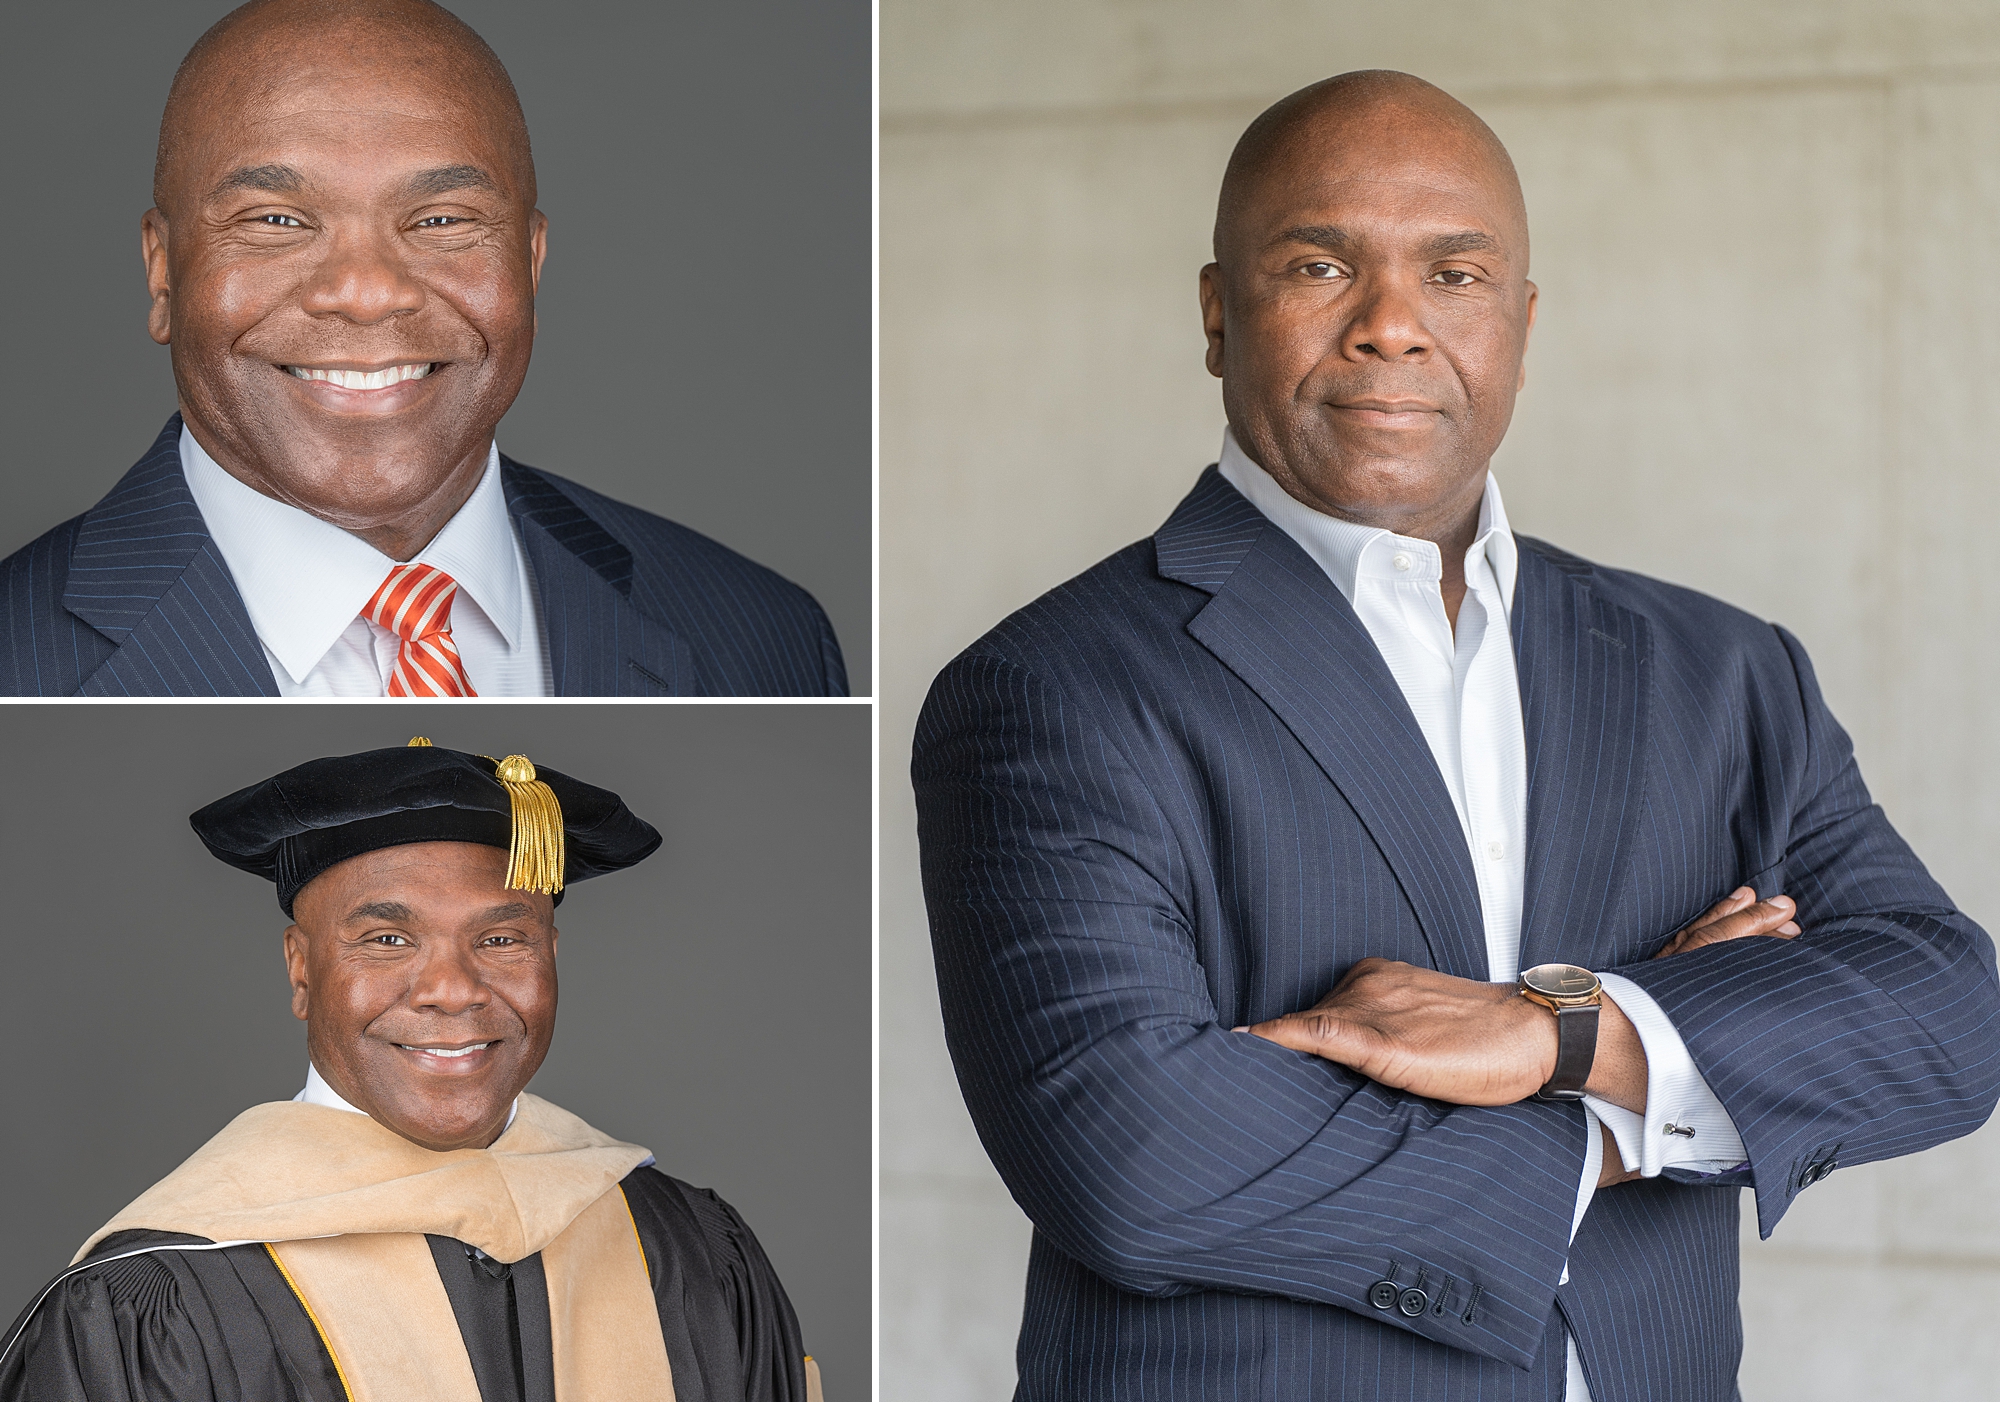 3 image collage of man for headshots and branding